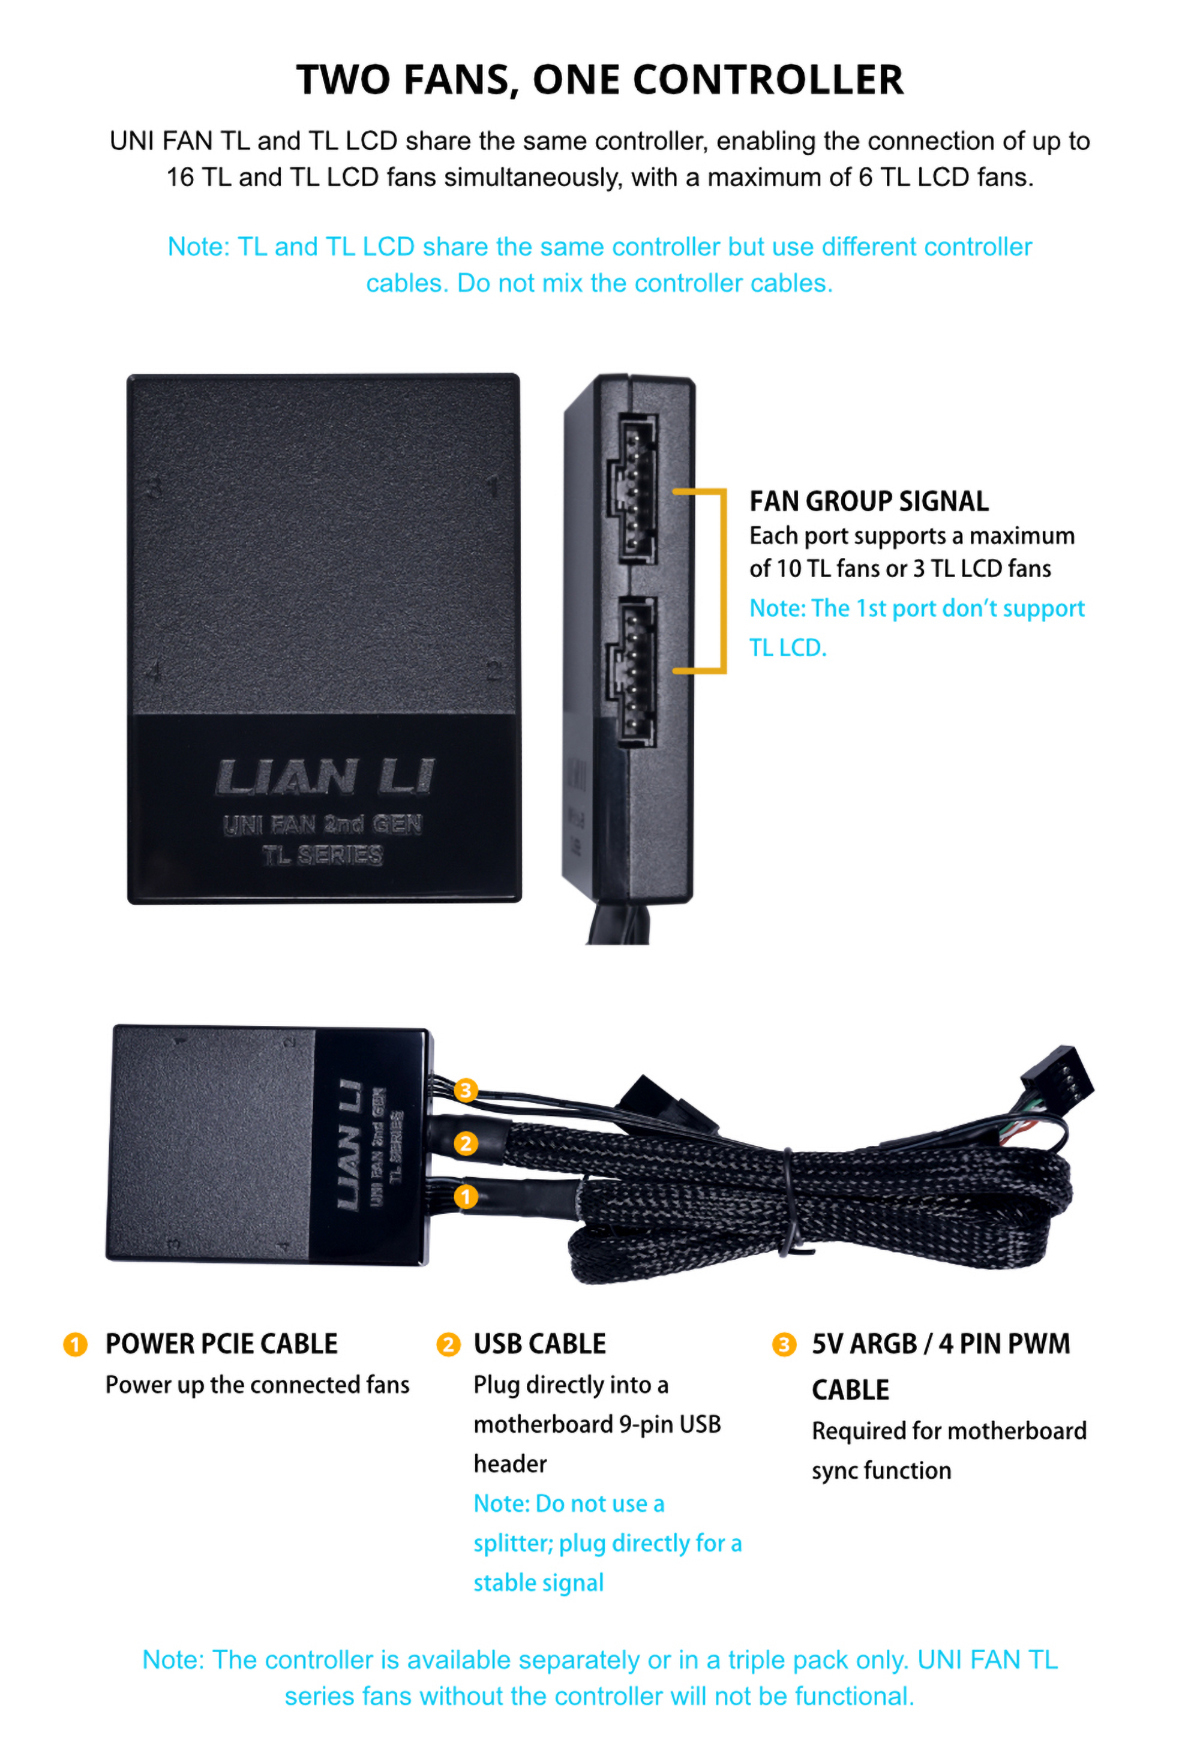 Lian Li UNI FAN TL Series L-connect 3 Controller, Compatible With TL Series And TL LCD Series Fans  